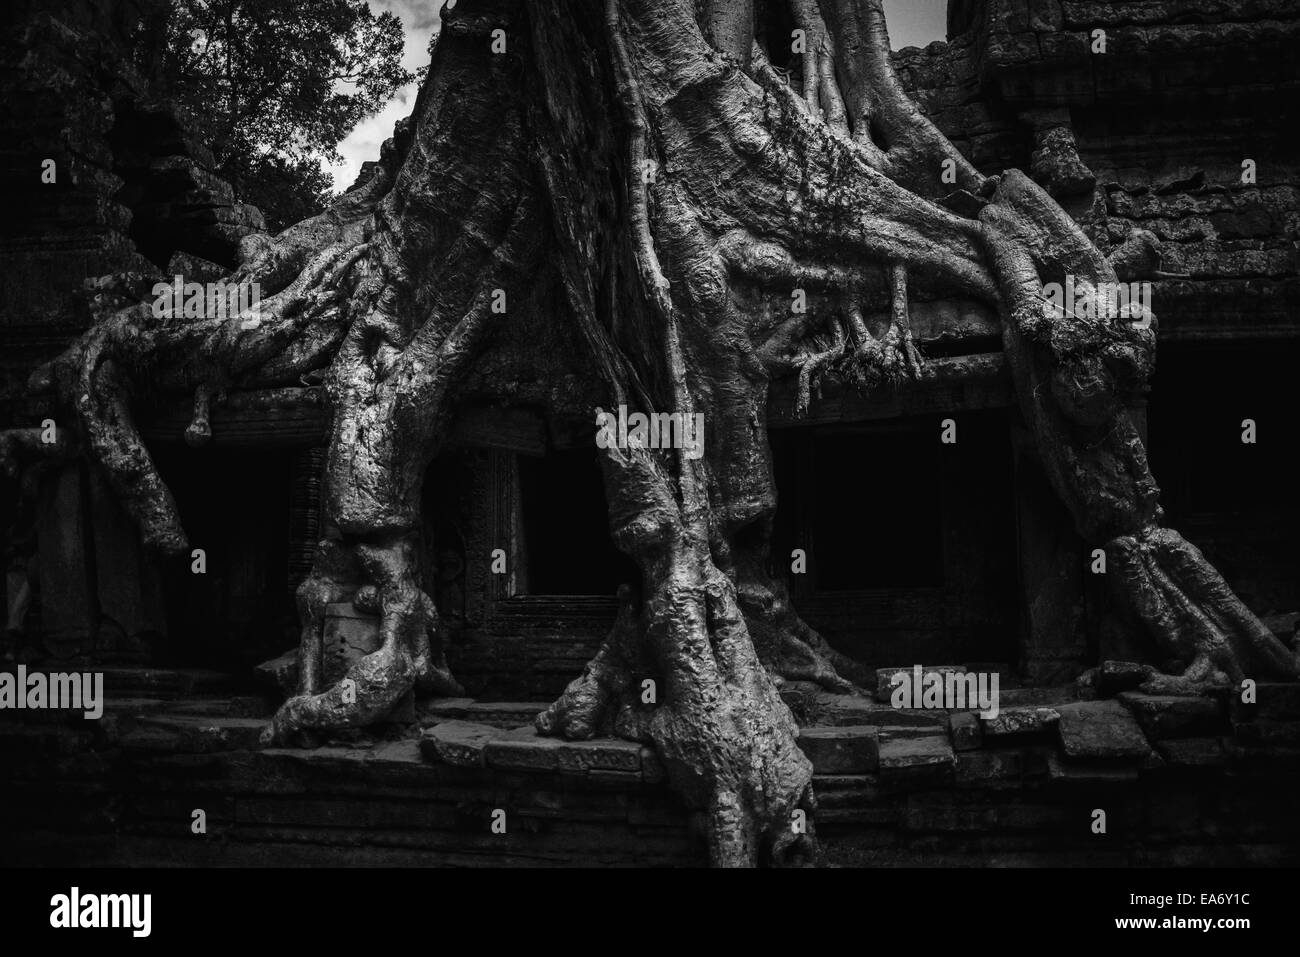 A giant jungle tree grows over a temple wall in the Angkor Wat temple complex; Siem Reap, Cambodia Stock Photo